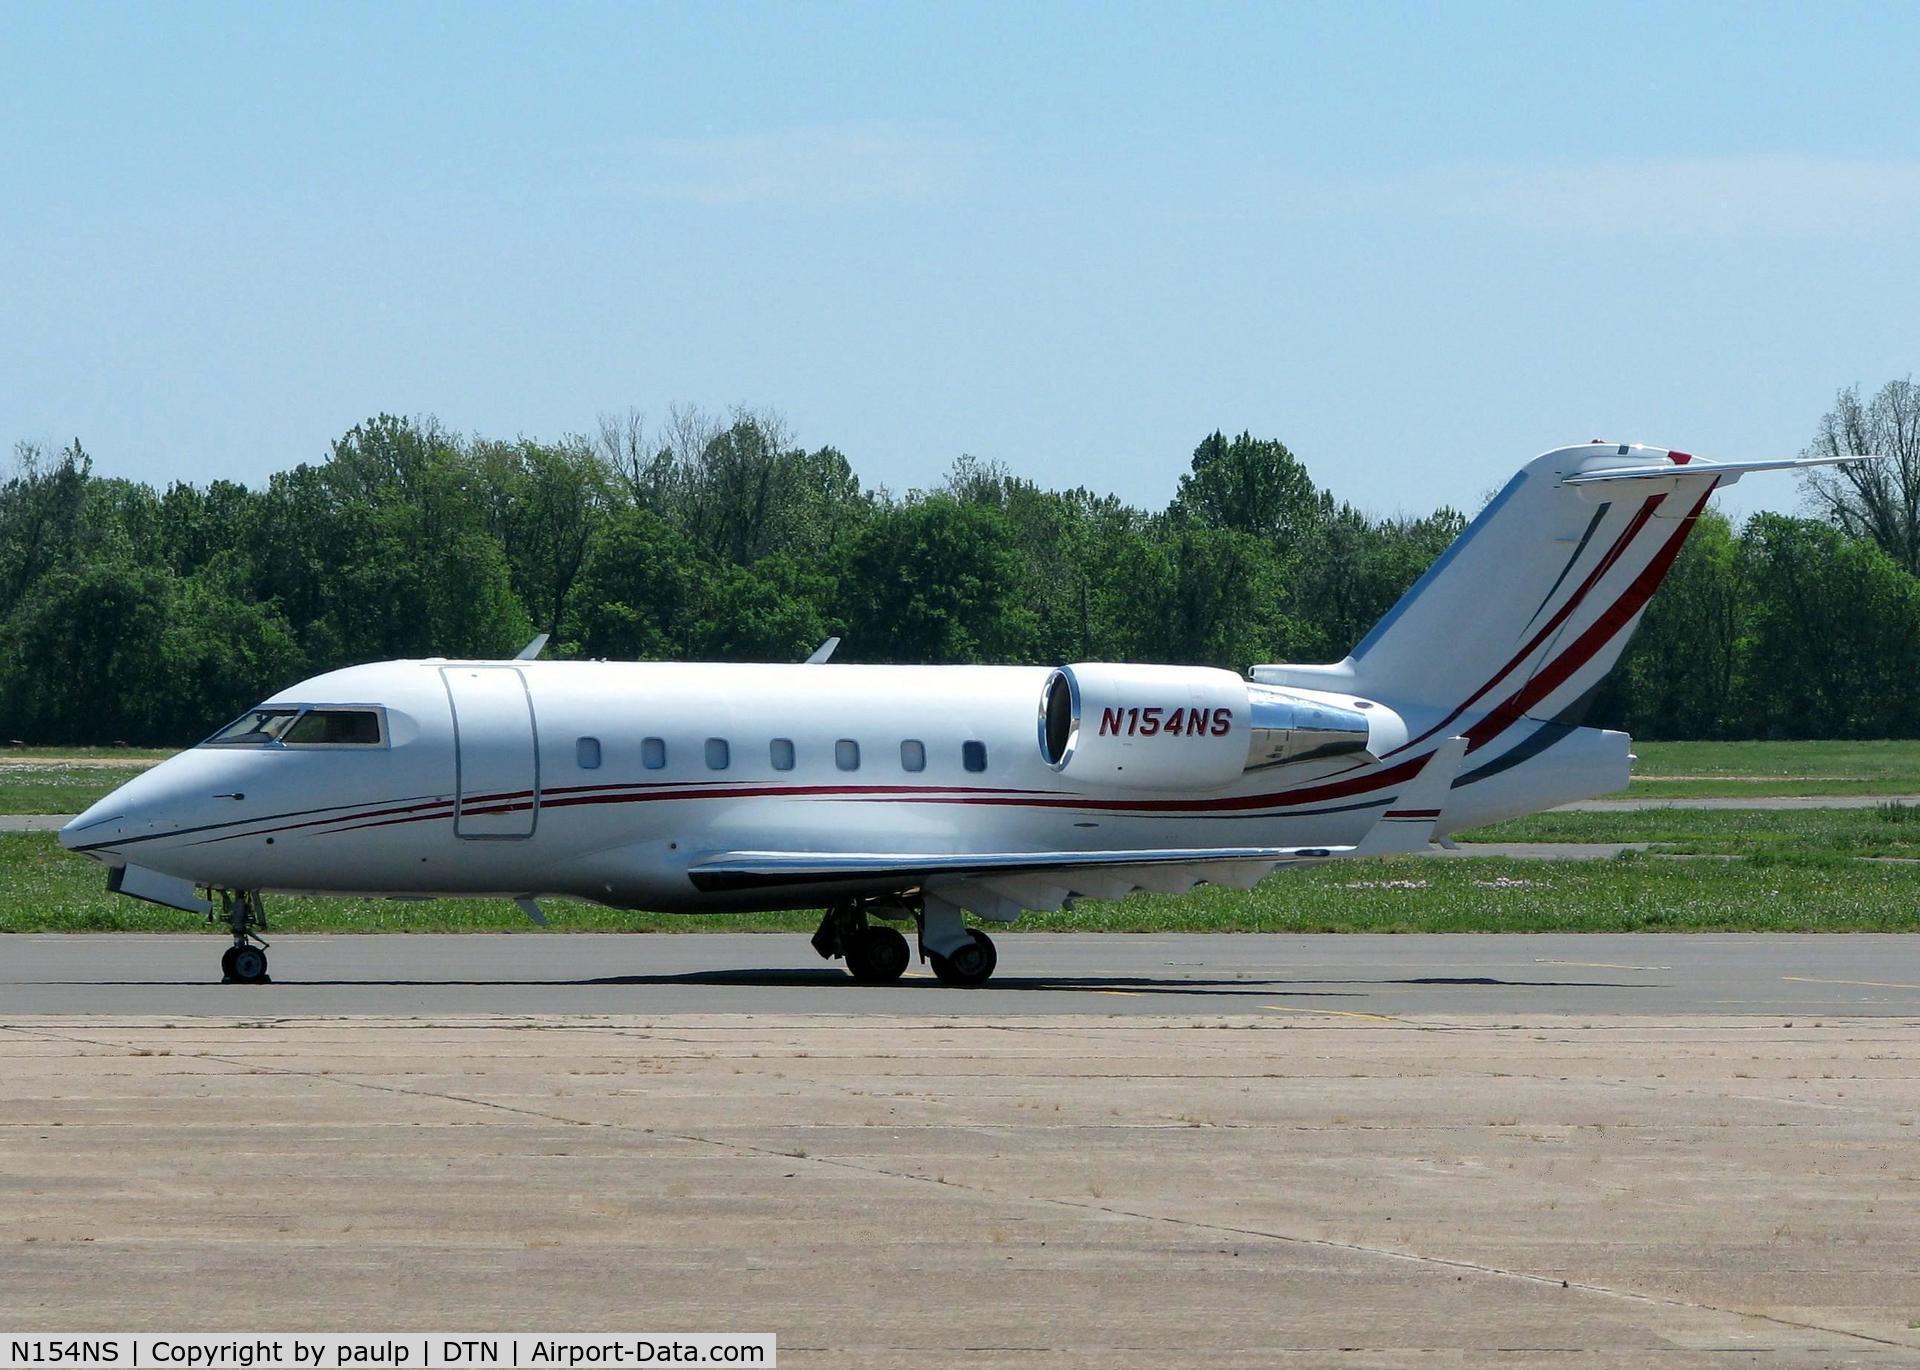 N154NS, 1994 Canadair Challenger 601-3R (CL-600-2B16) C/N 5169, At Downtown Shreveport.